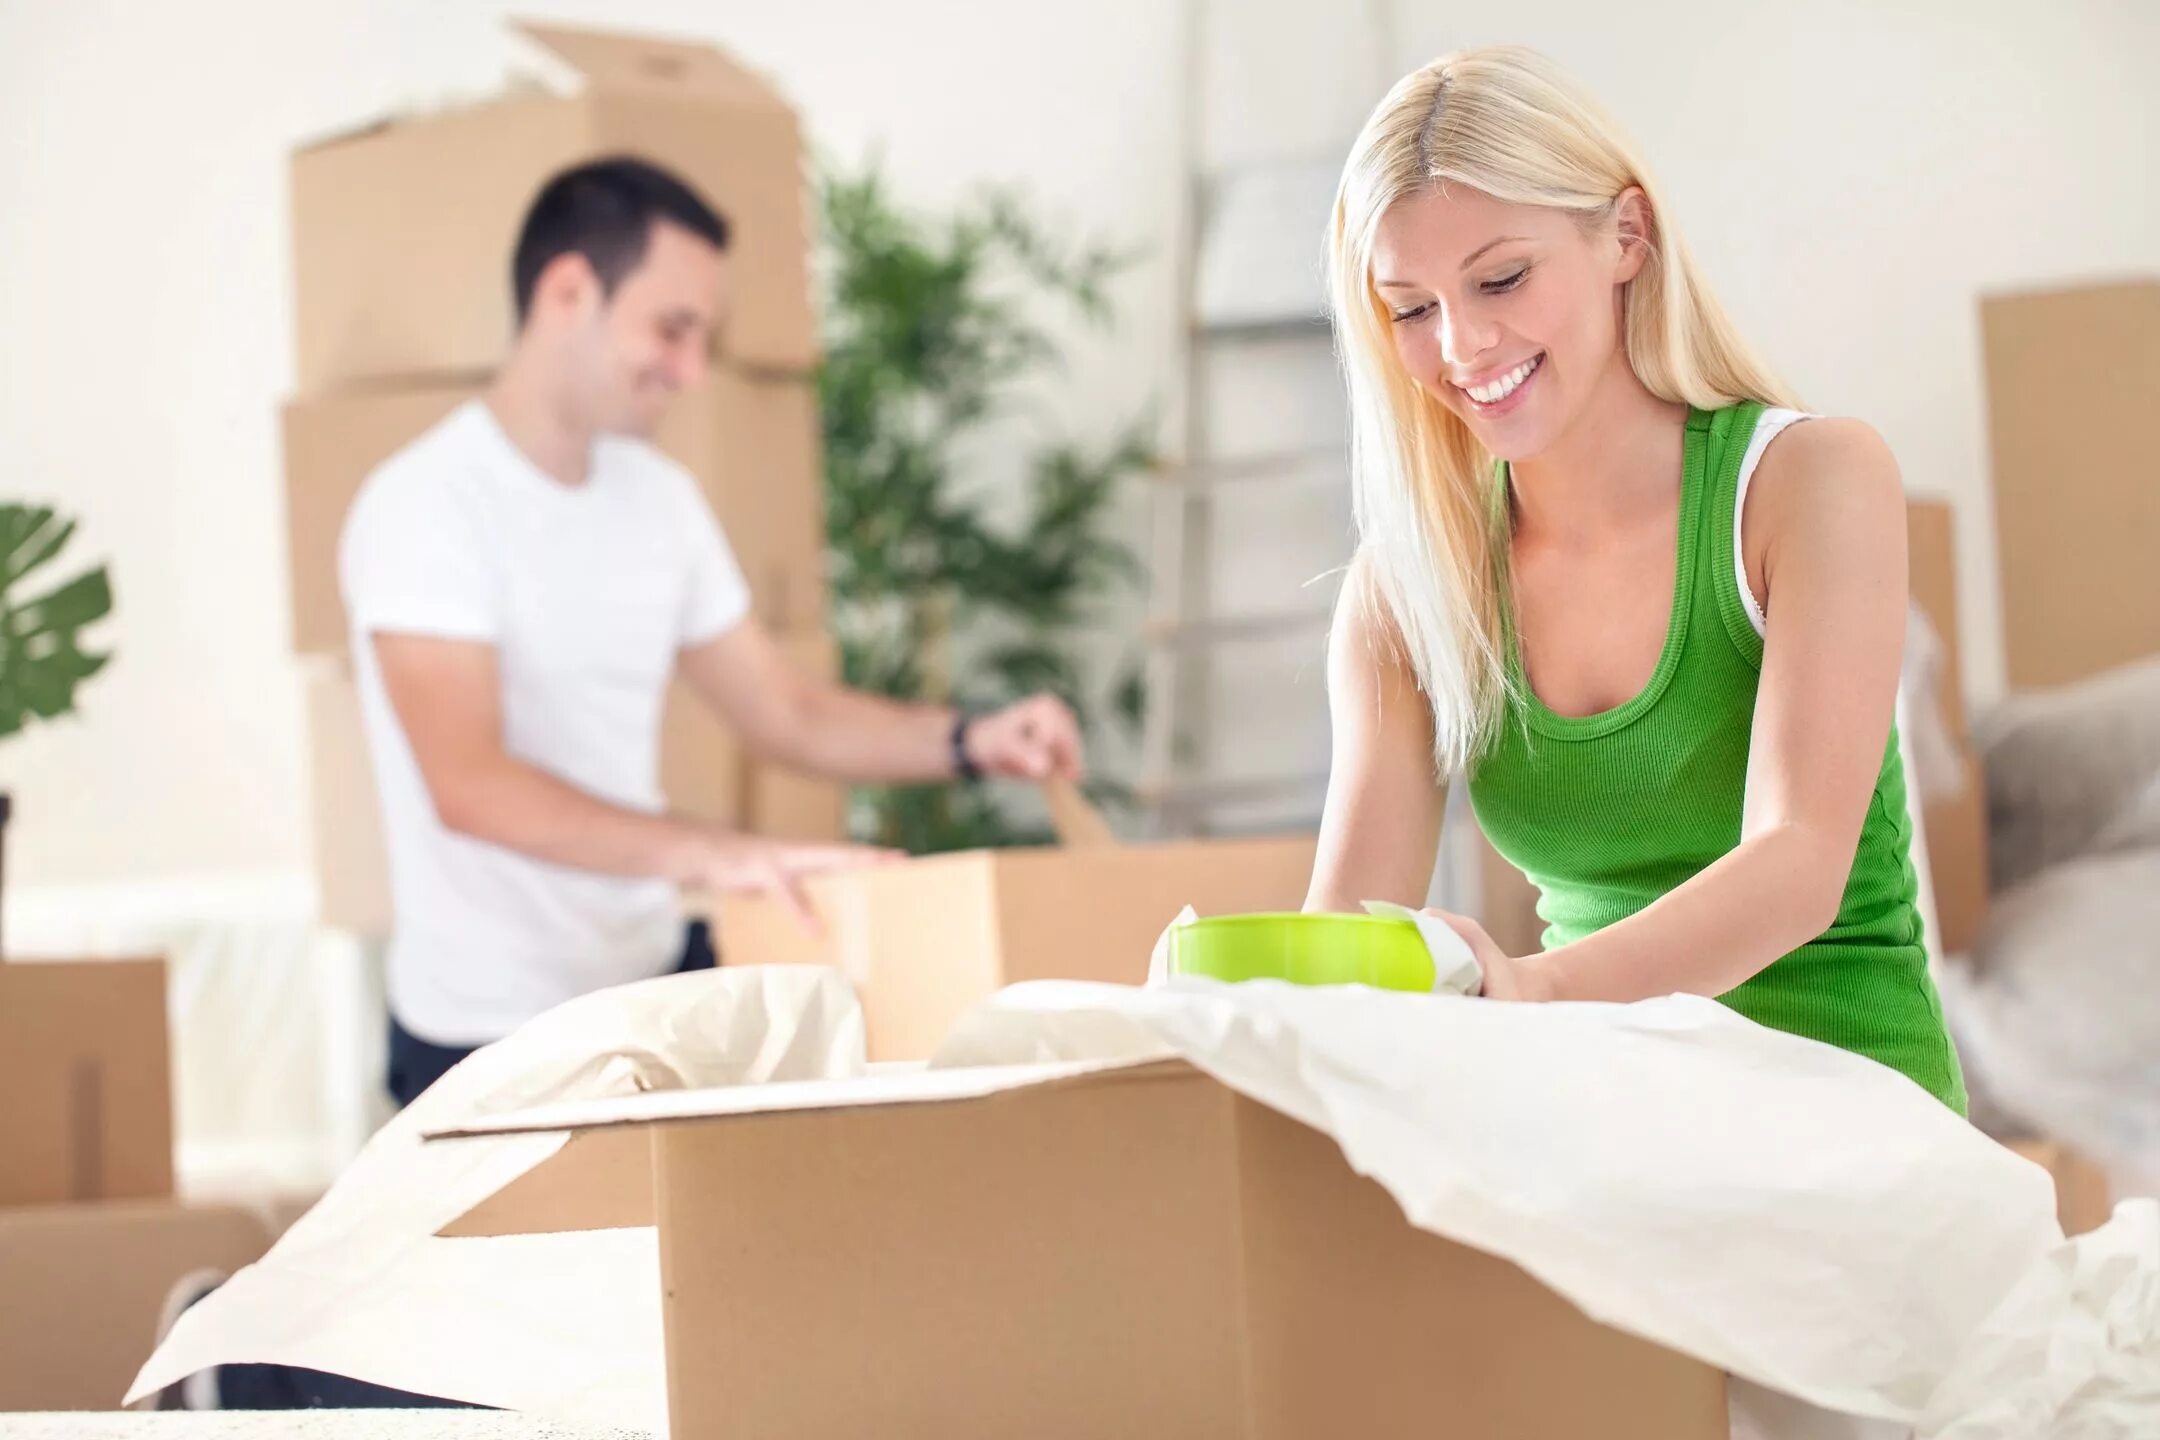 Move package. Residential Packers and Movers. Довольные клиенты переезды. Переезд девушка и мужчина. Best Packing and moving.